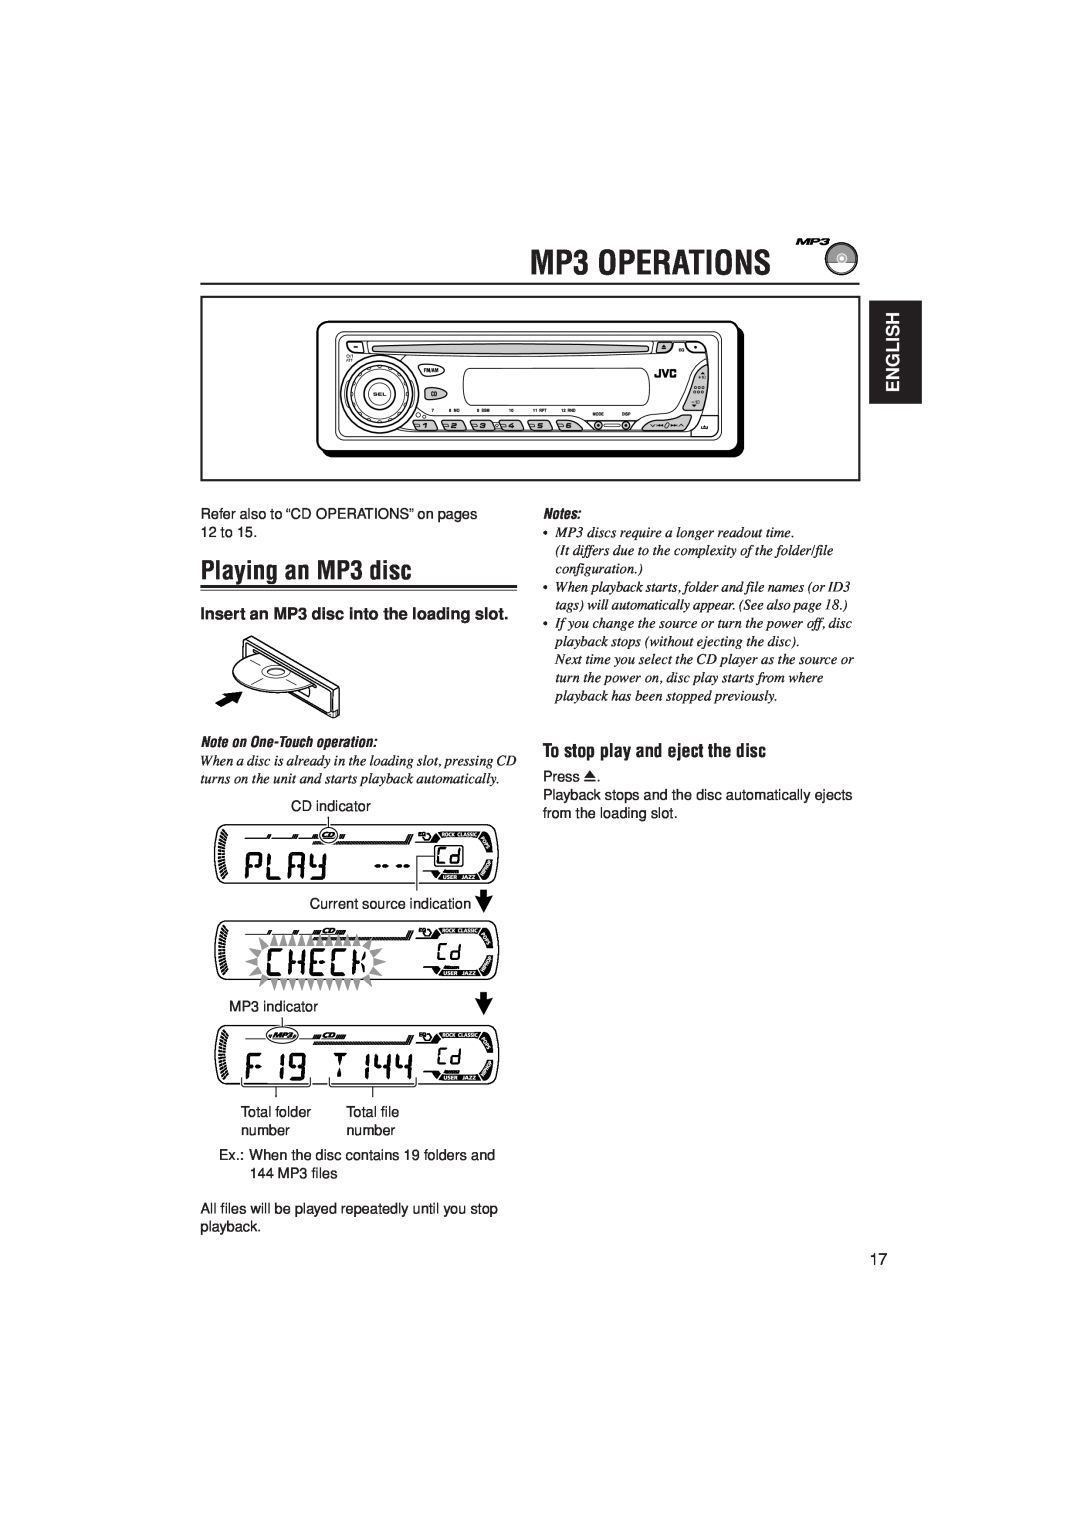 JVC KD-G407 MP3 OPERATIONS, Playing an MP3 disc, To stop play and eject the disc, English, Note on One-Touchoperation 